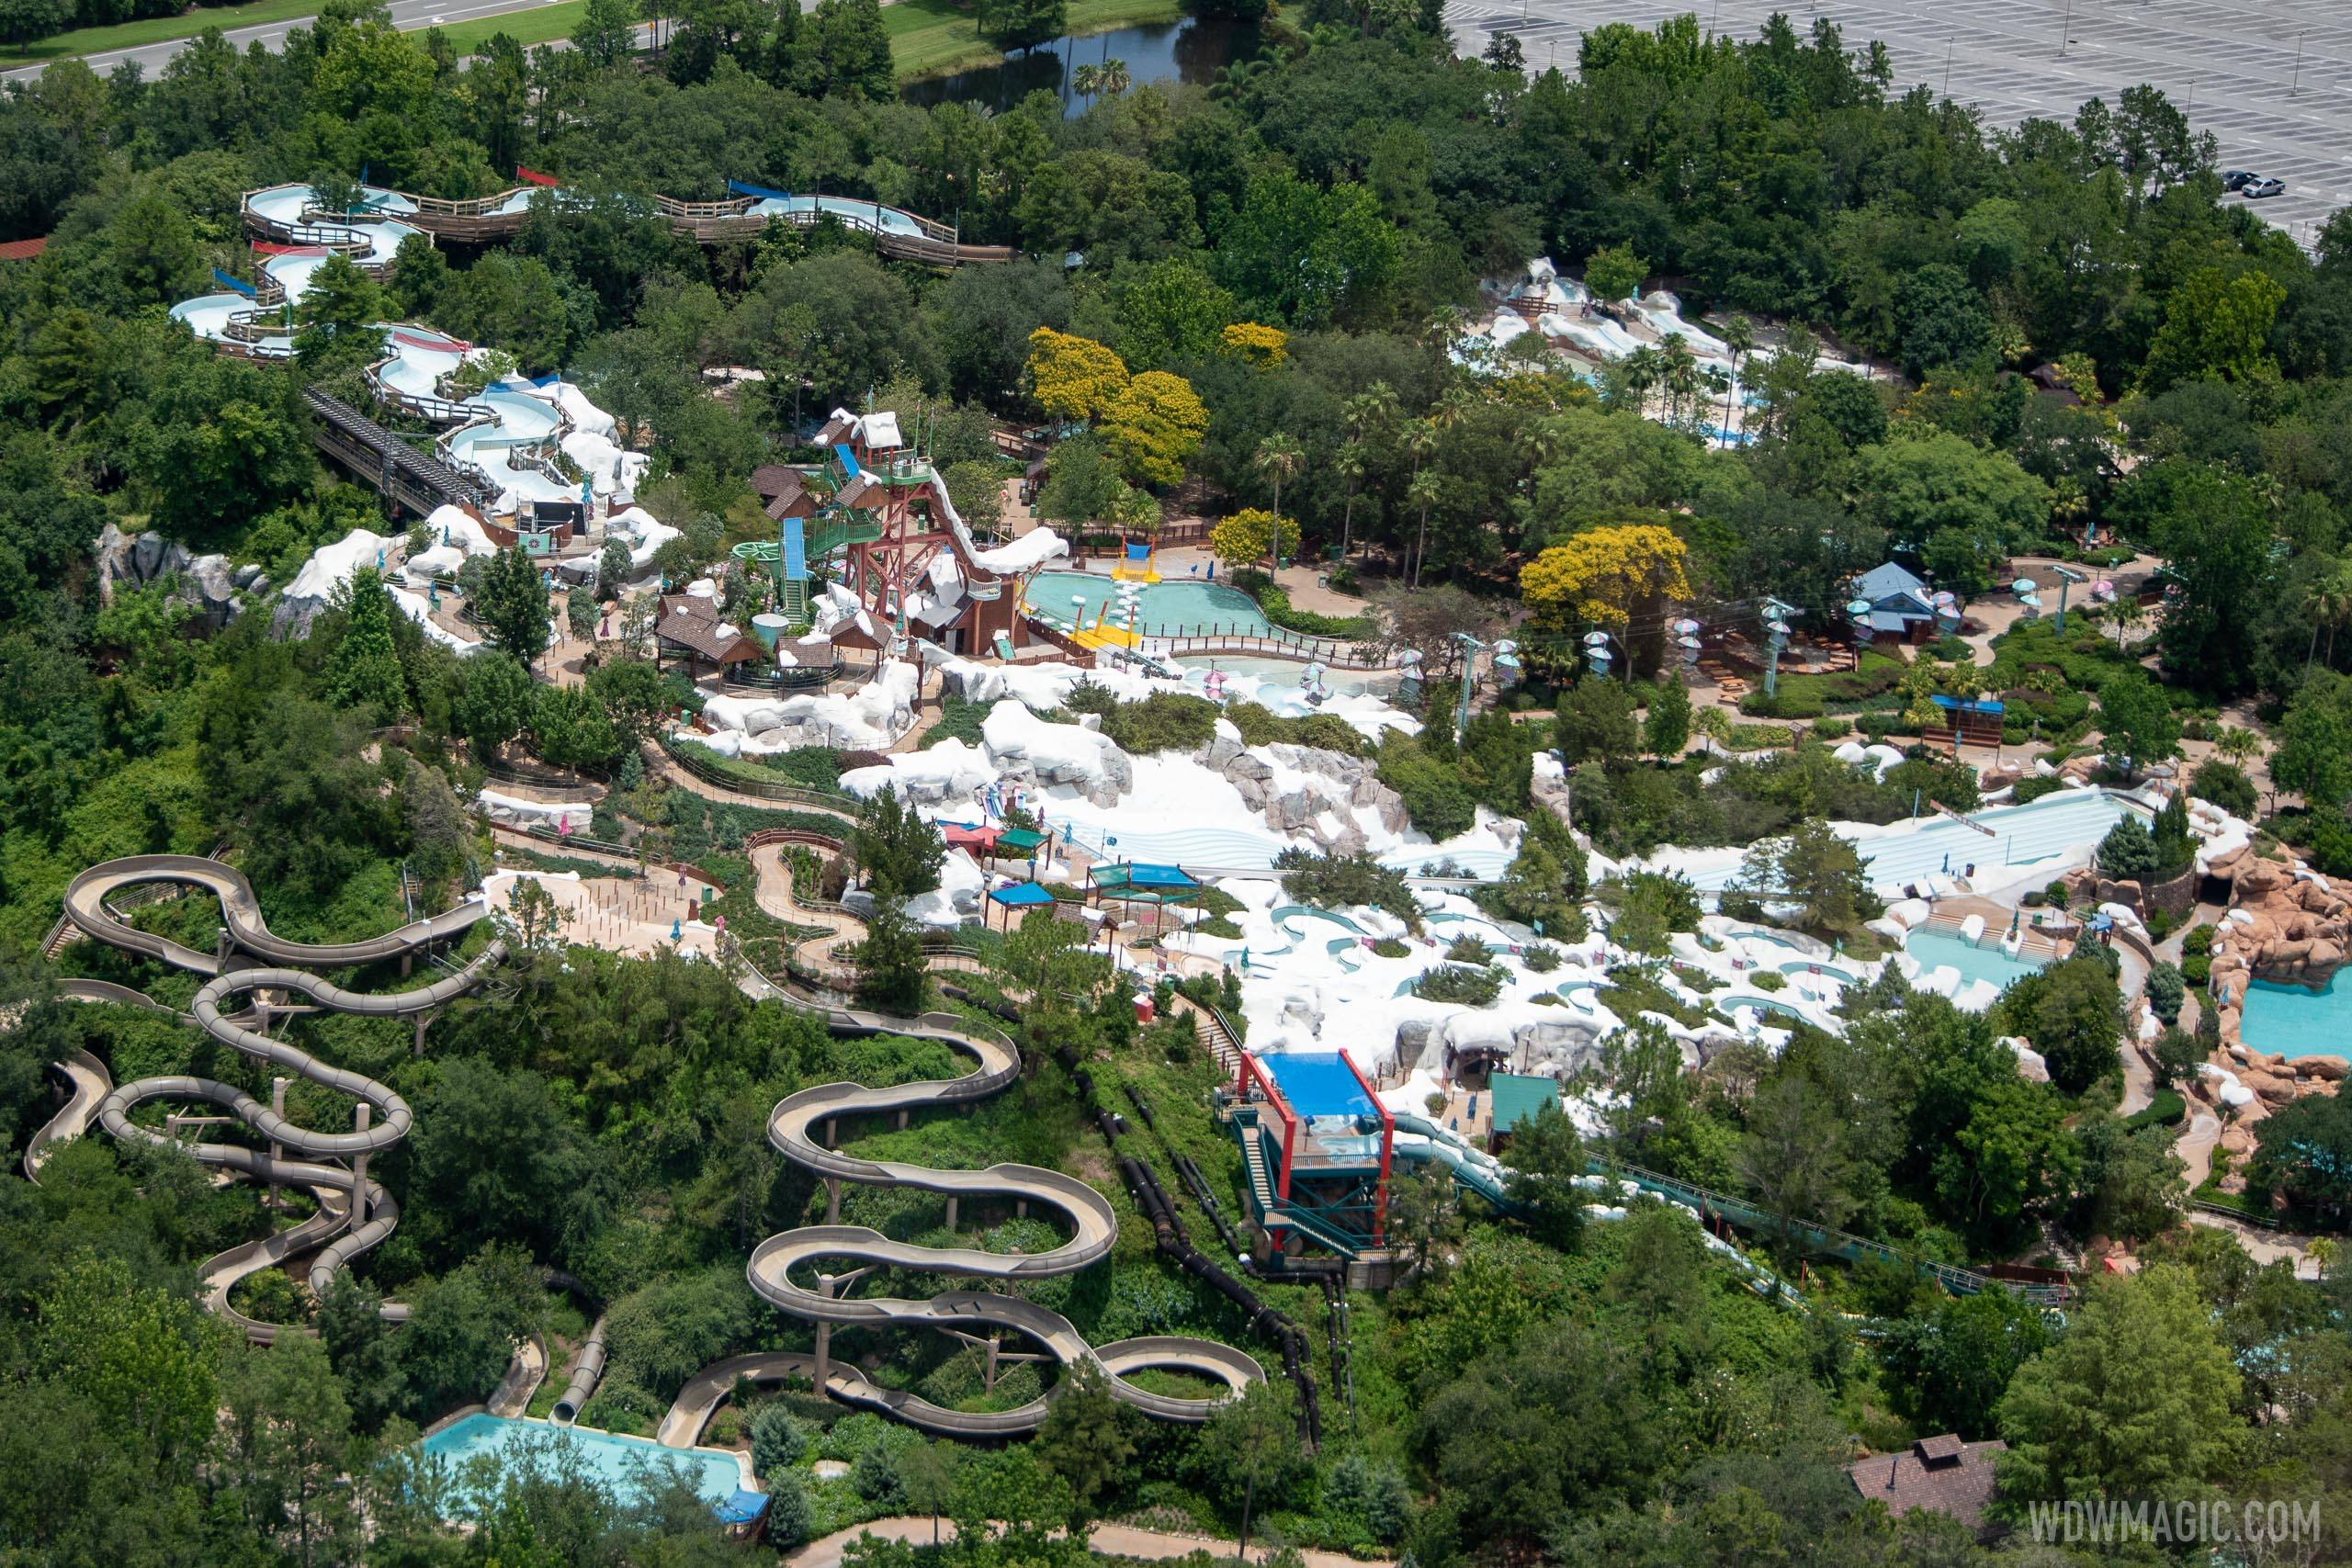 Blizzard Beach will be closed Thursday and Friday